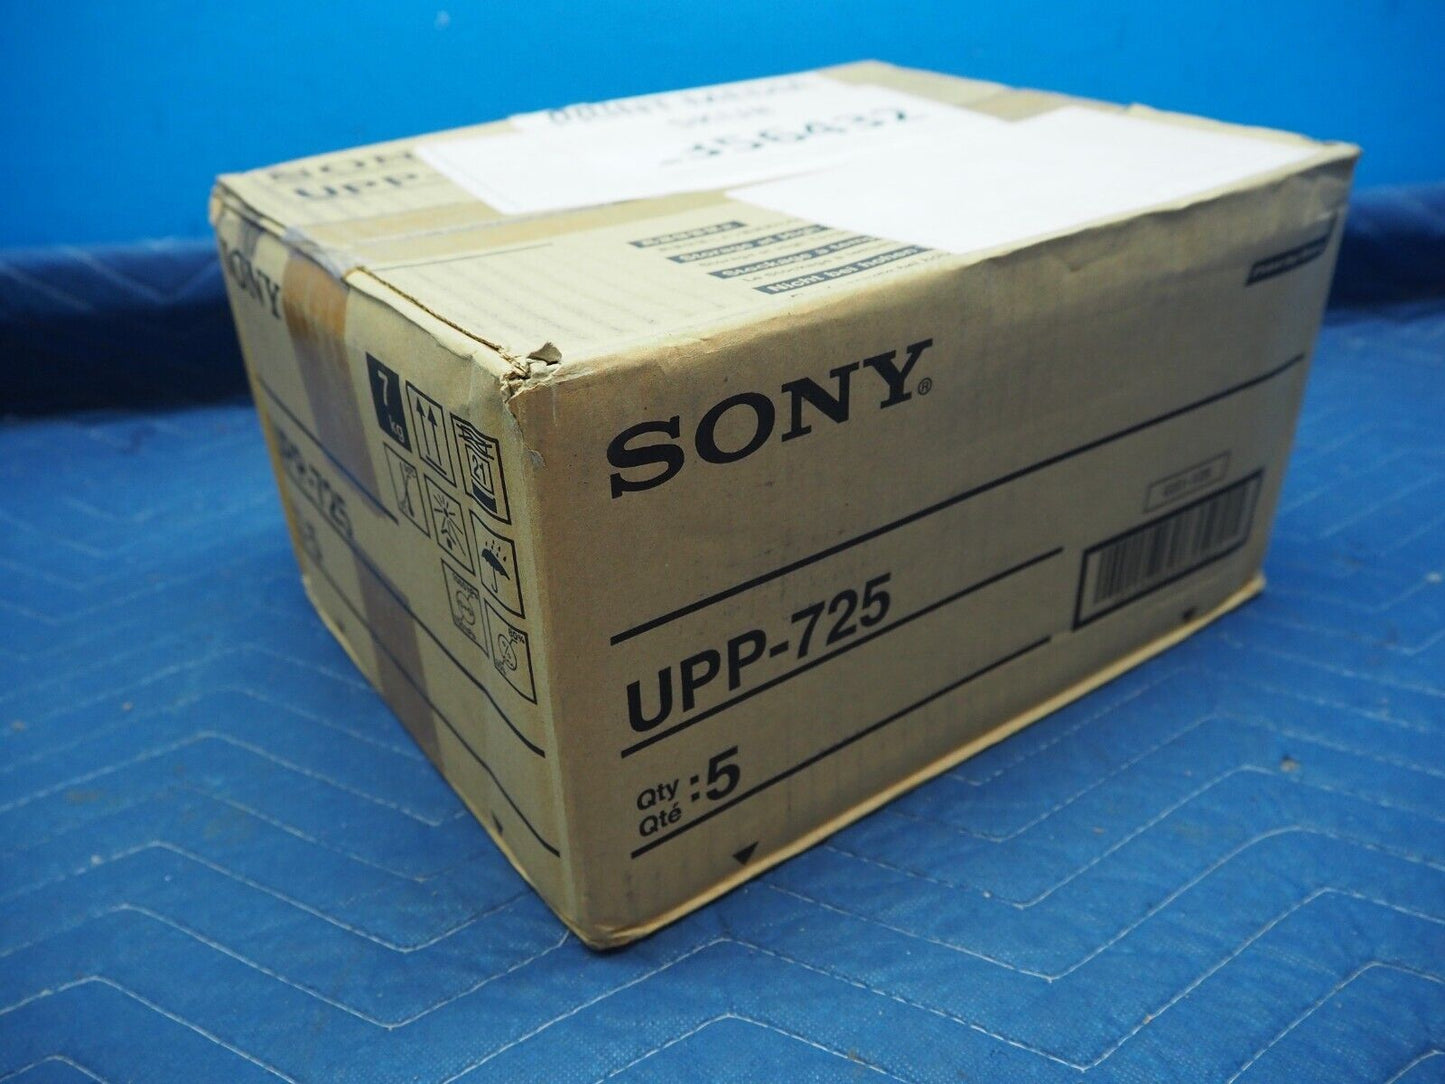 1x Case / 5x Boxes / 500 Sheets Sony UPP-725 Thermal Paper for UP-D74XRD UP-D72XR